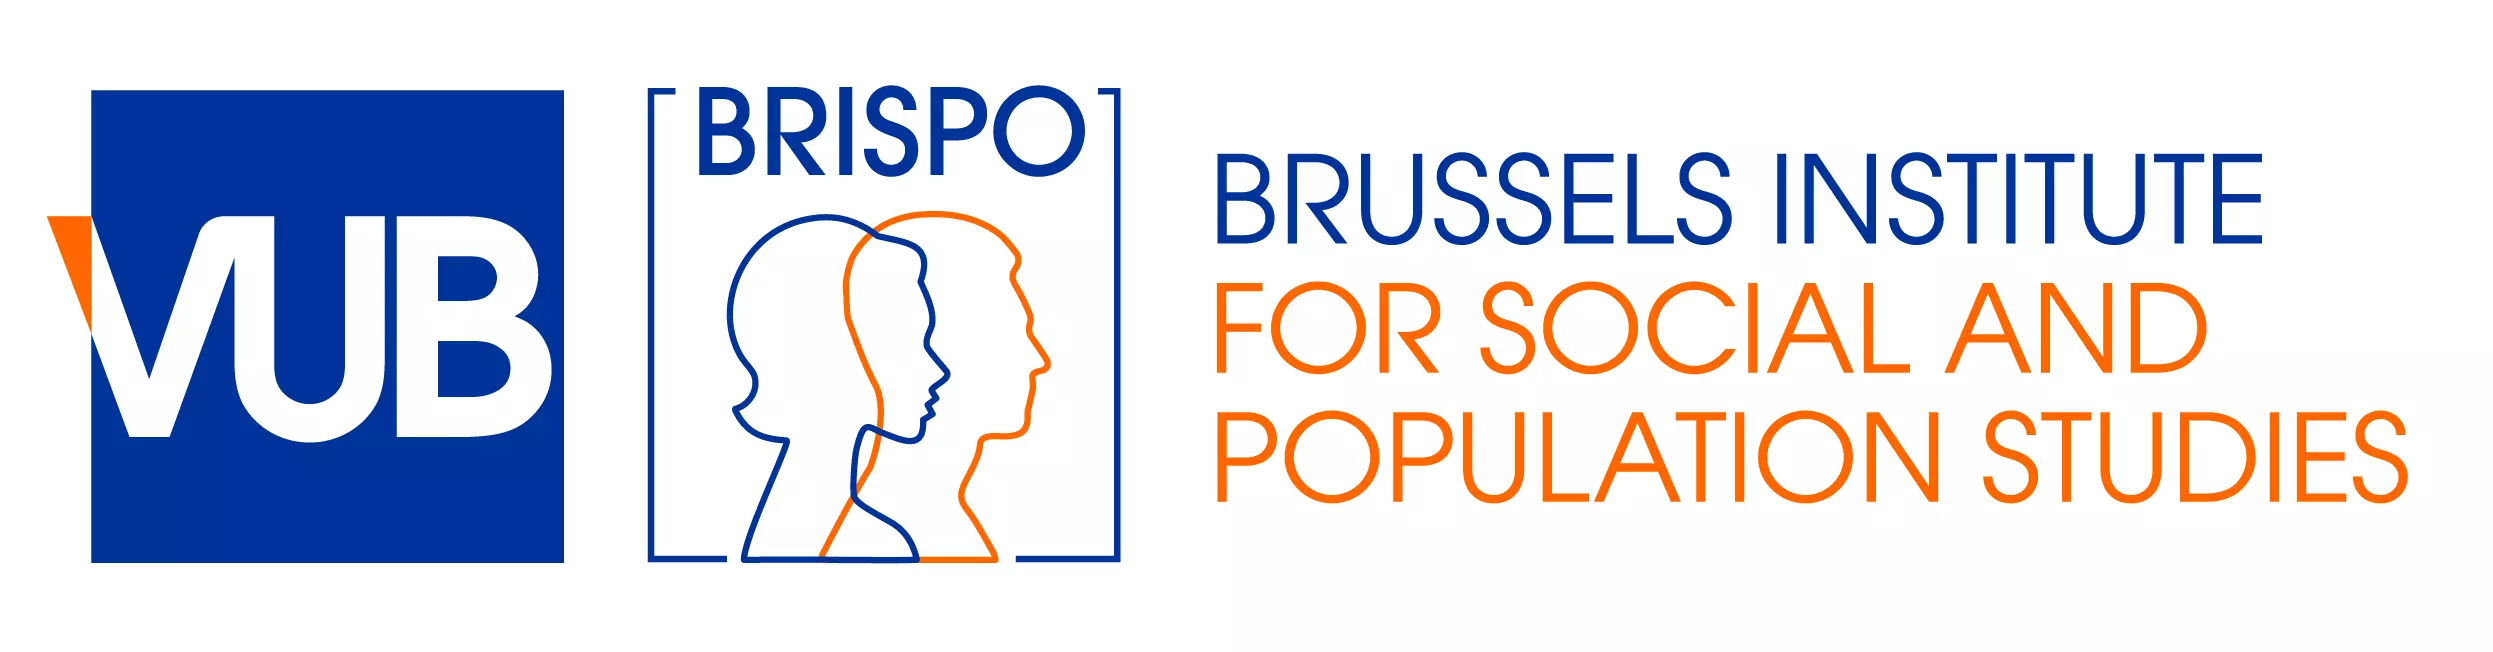 BRISPO: Brussels Institute for Social and Population Studies home page